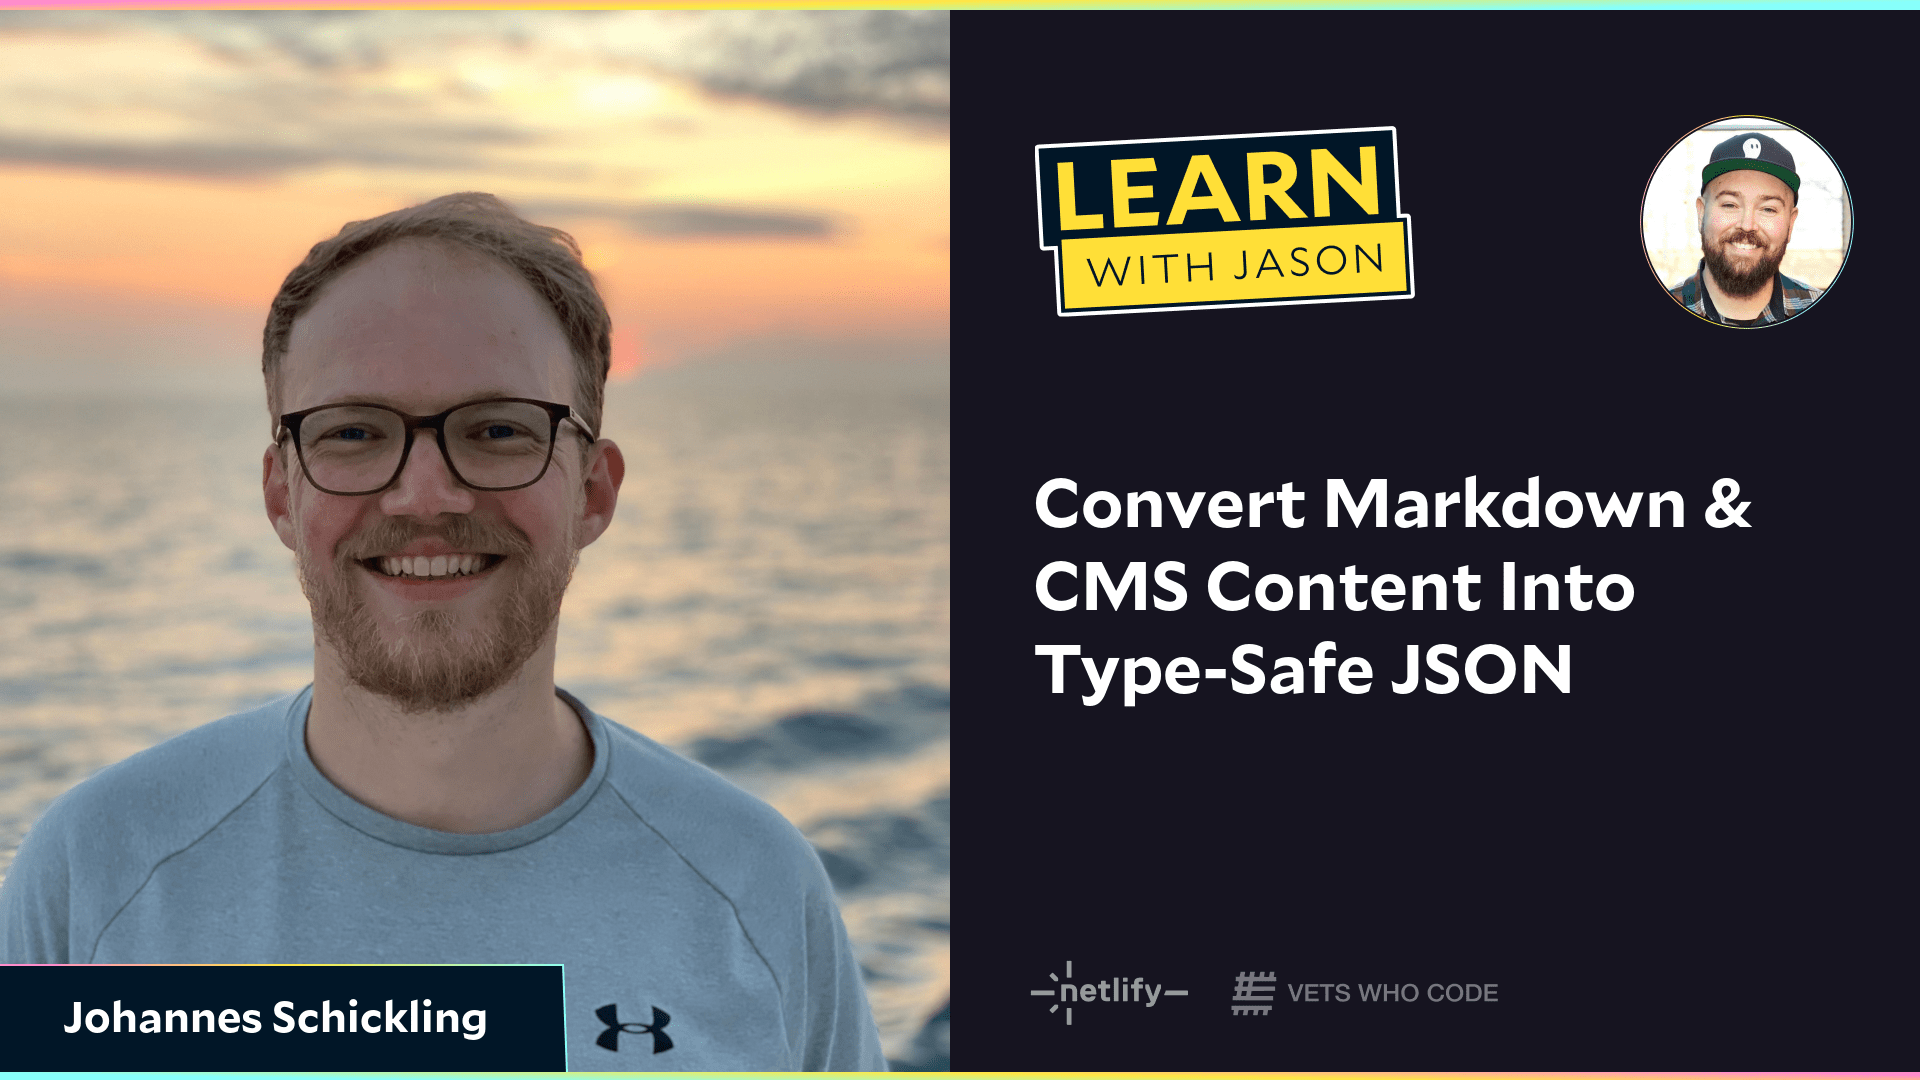 Convert Markdown & CMS Content Into Type-Safe JSON (with Johannes Schickling)